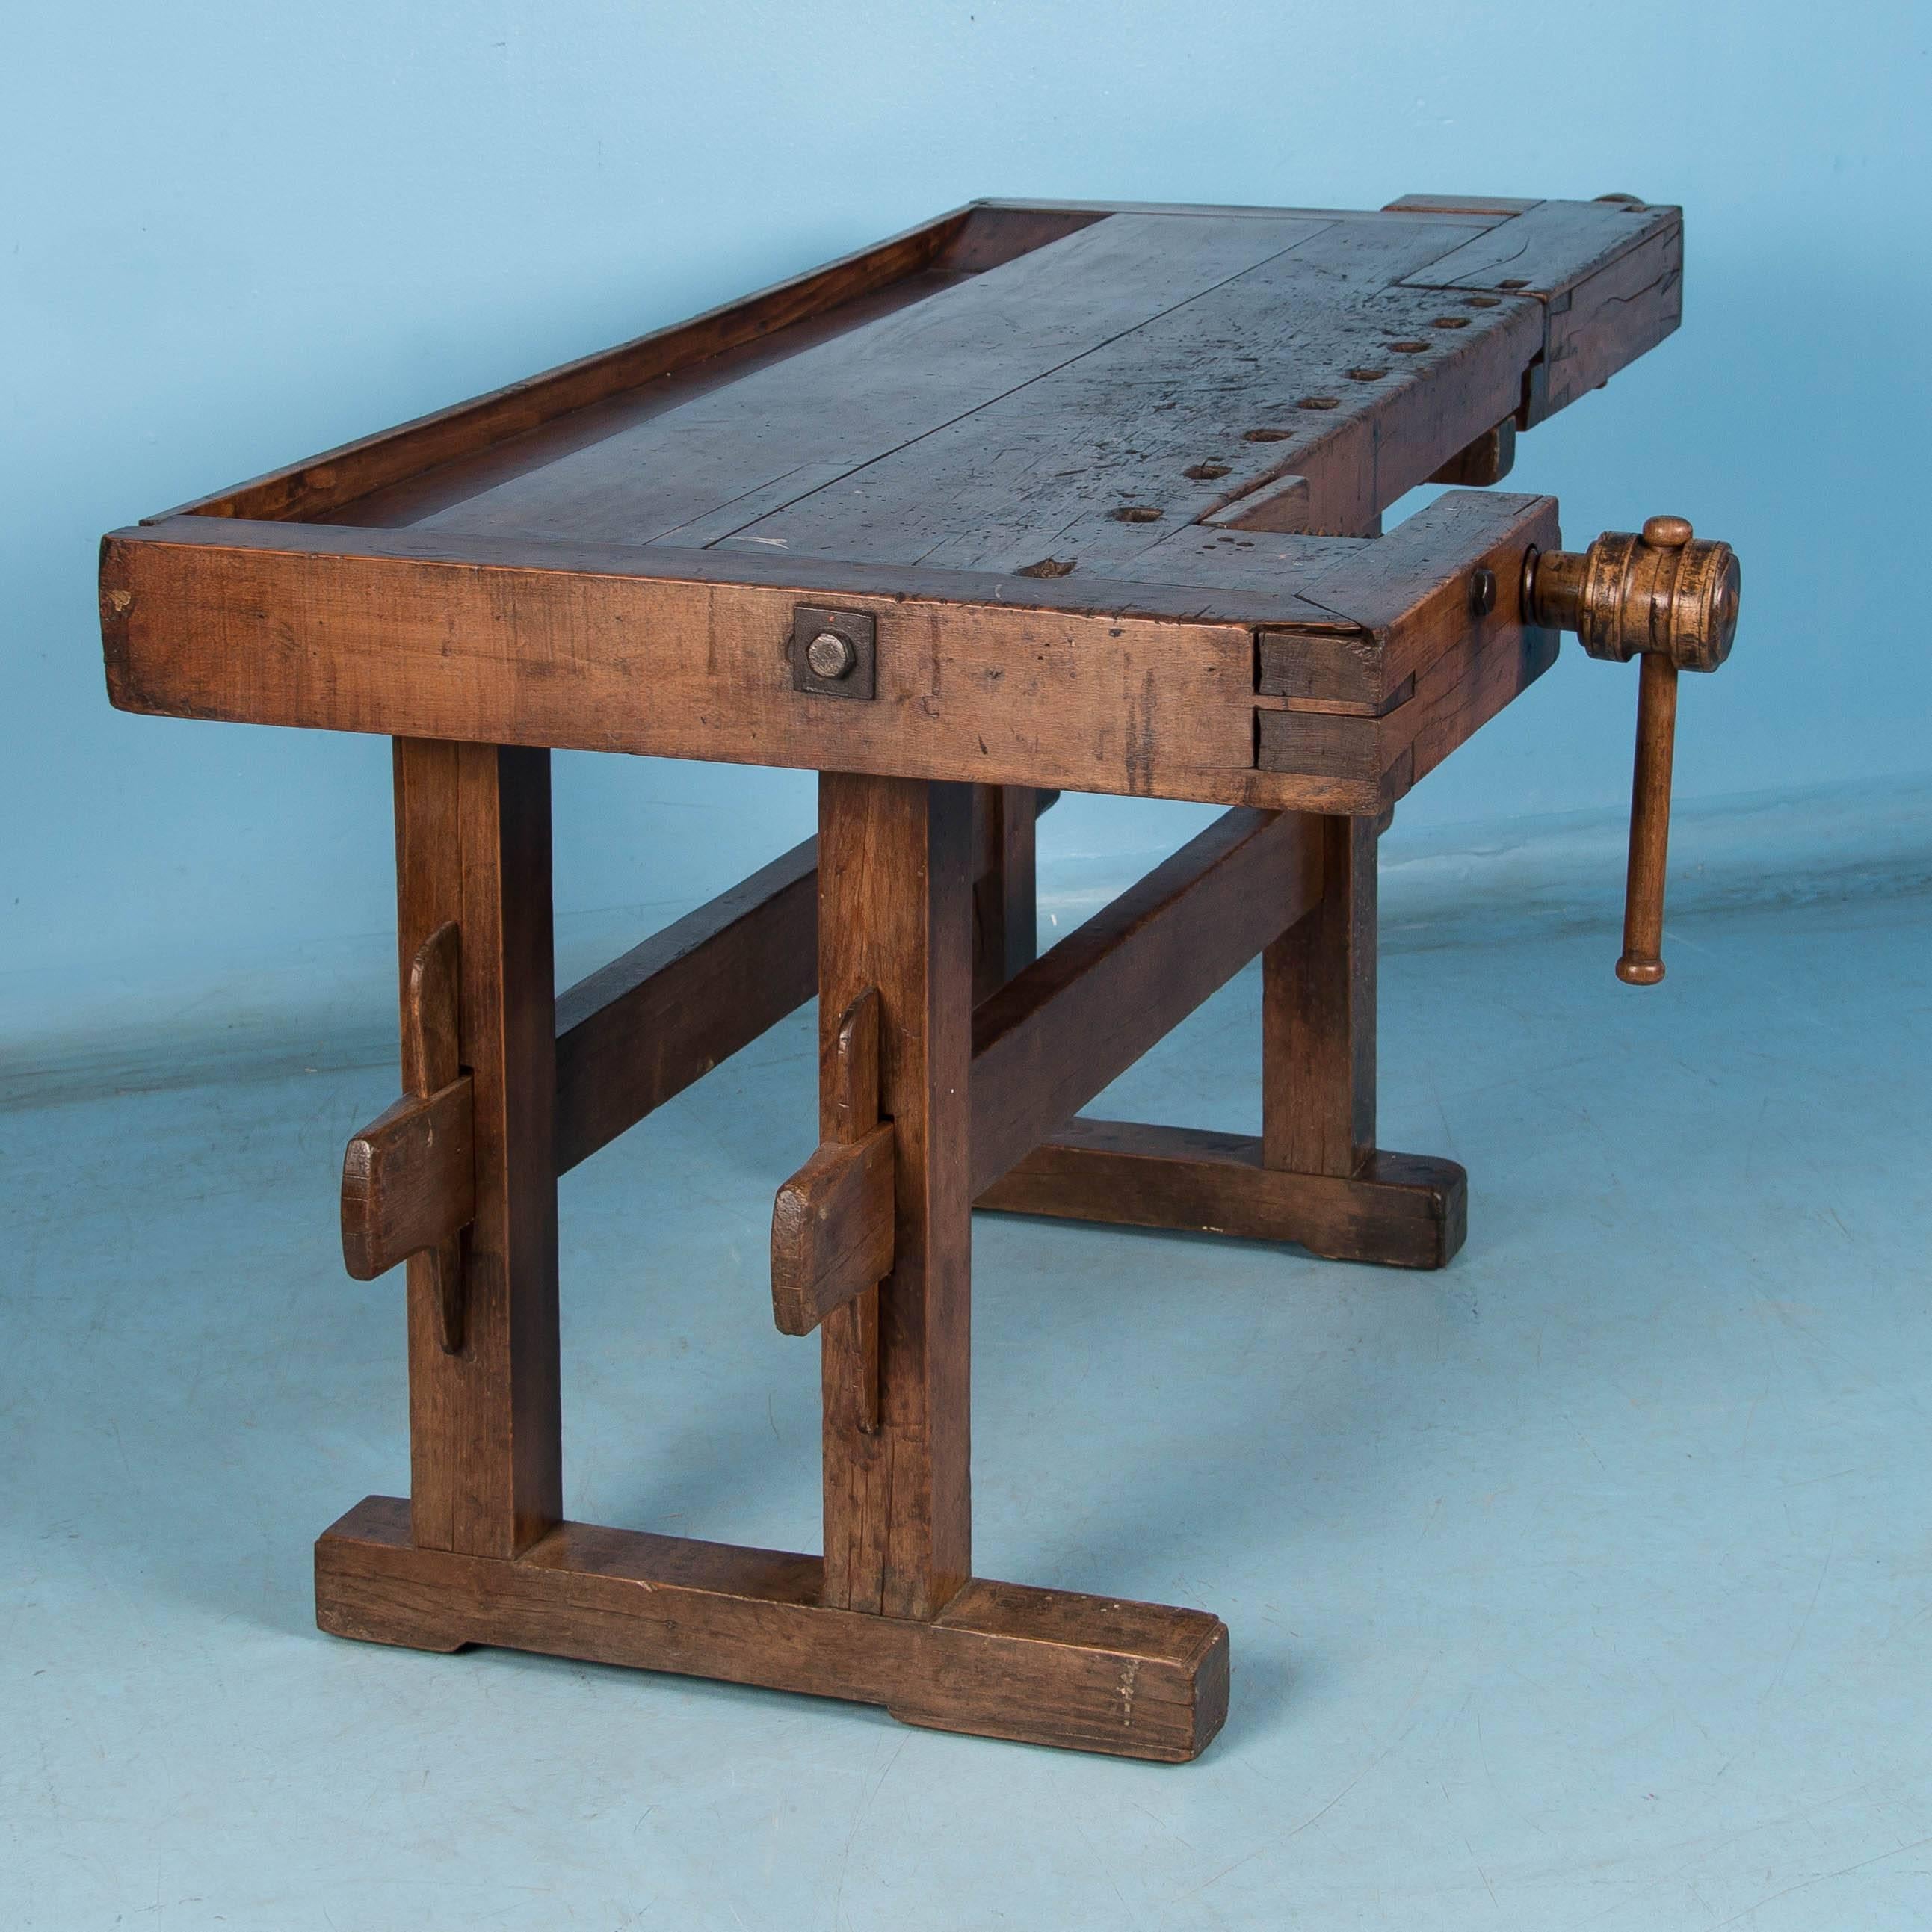 Beautiful antique Hungarian carpenters’ workbench, bearing an incredible patina after years of traditional use. It has two vices with wood handle and a recessed tray where the carpenter would lay his tools. The traditional trestle base allowed it to